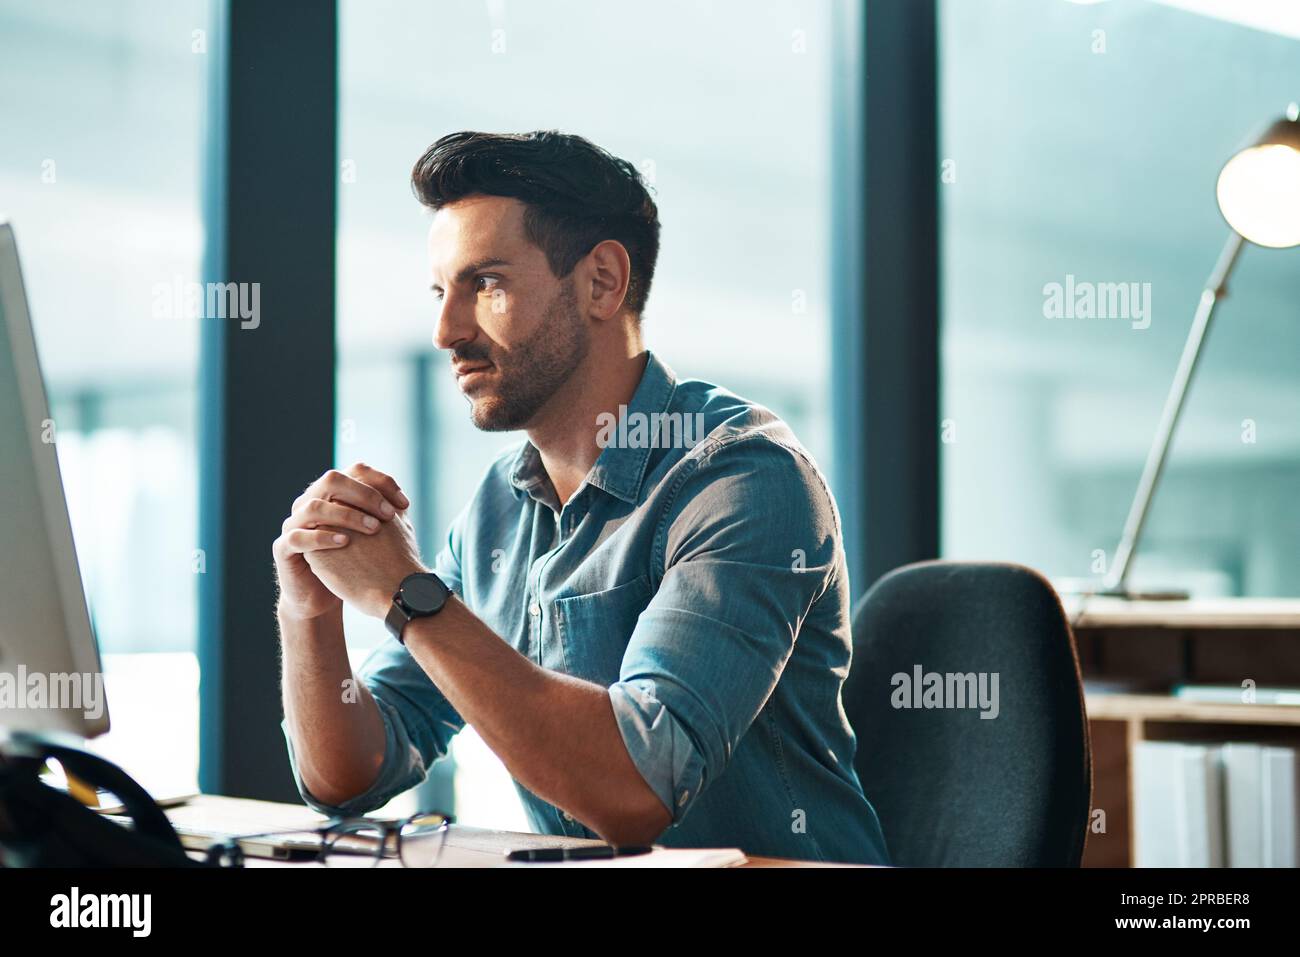 Serious, busy and thinking business man working at his computer desk alone inside a modern office near a window. Worried entrepreneur, manager or boss reading emails and looking stressed Stock Photo